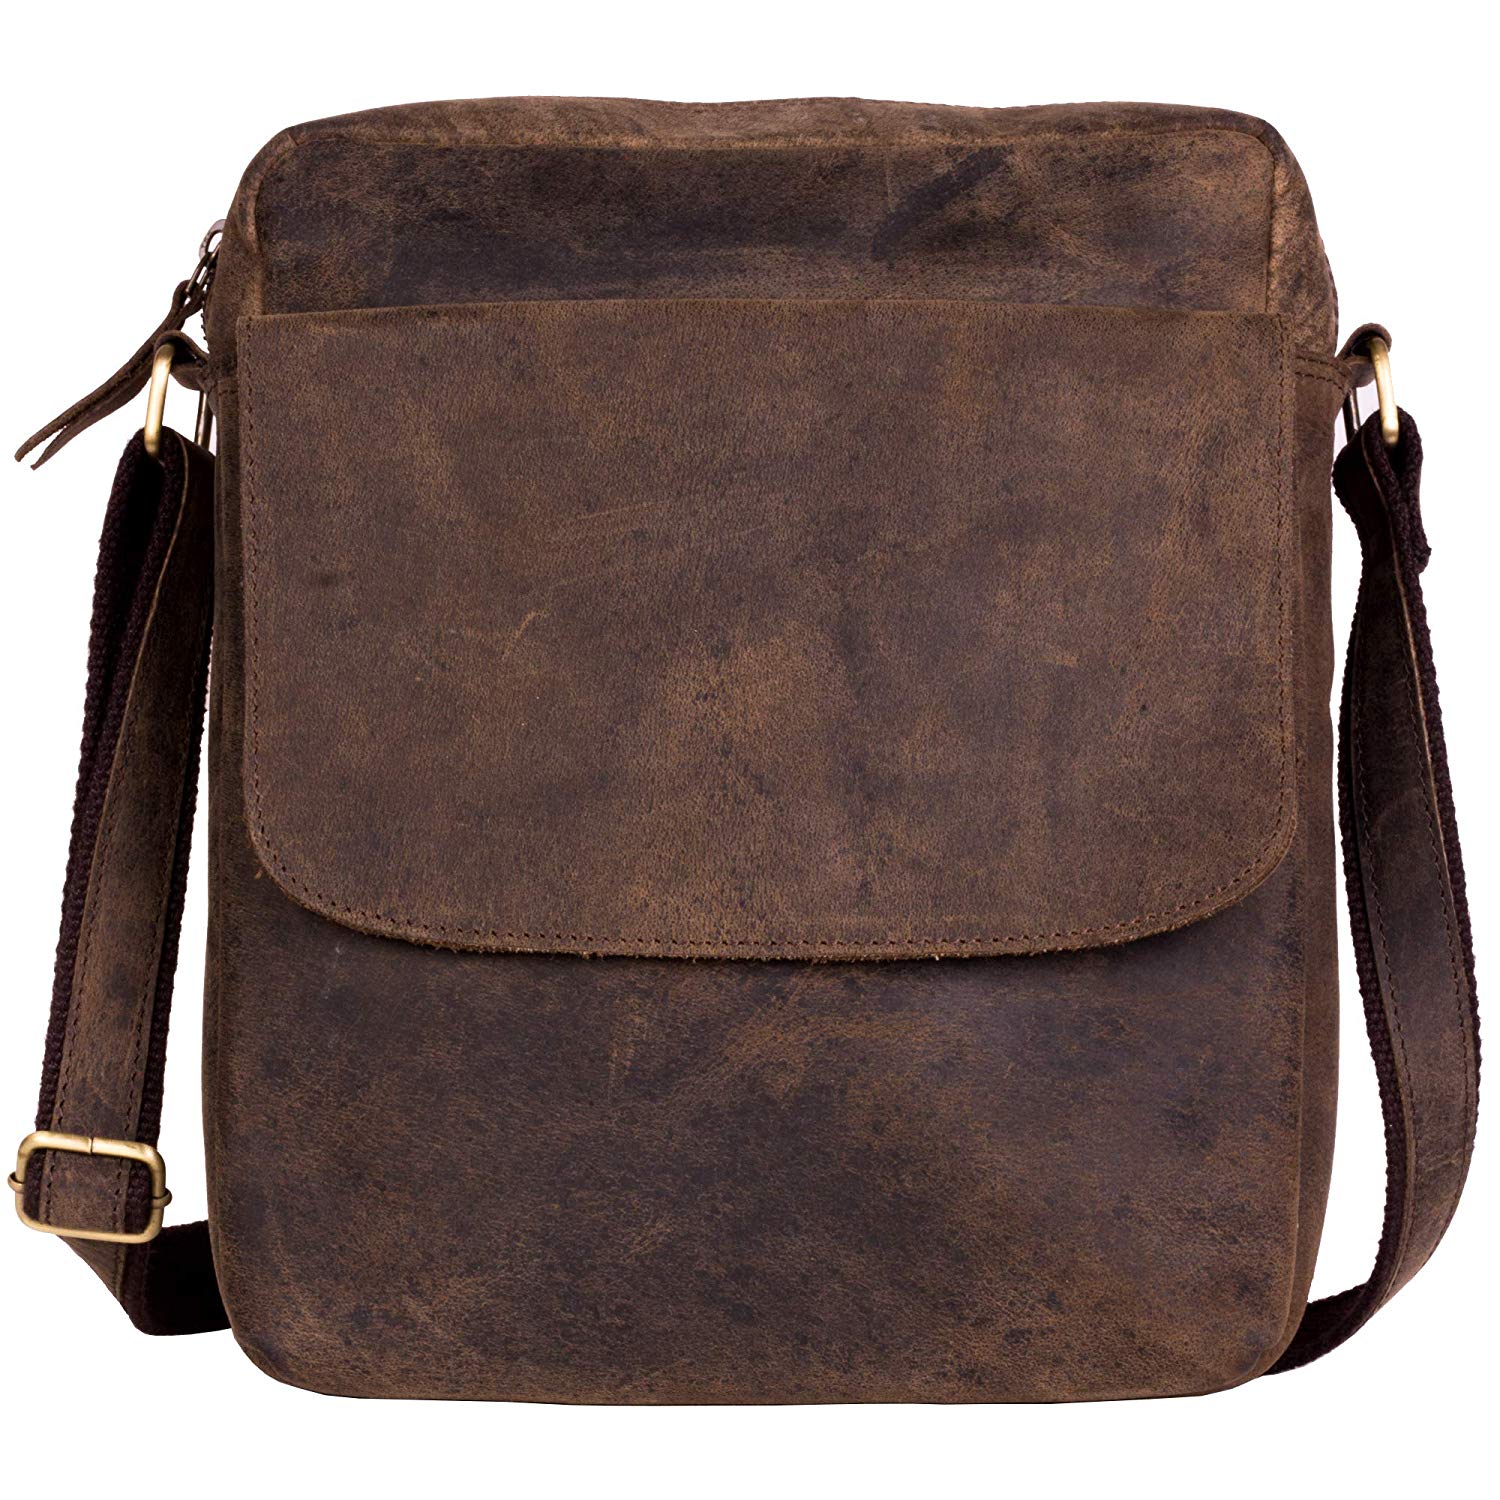 BrownCanvas and Natural Leather Messenger Bag-Brussels11-Size Small